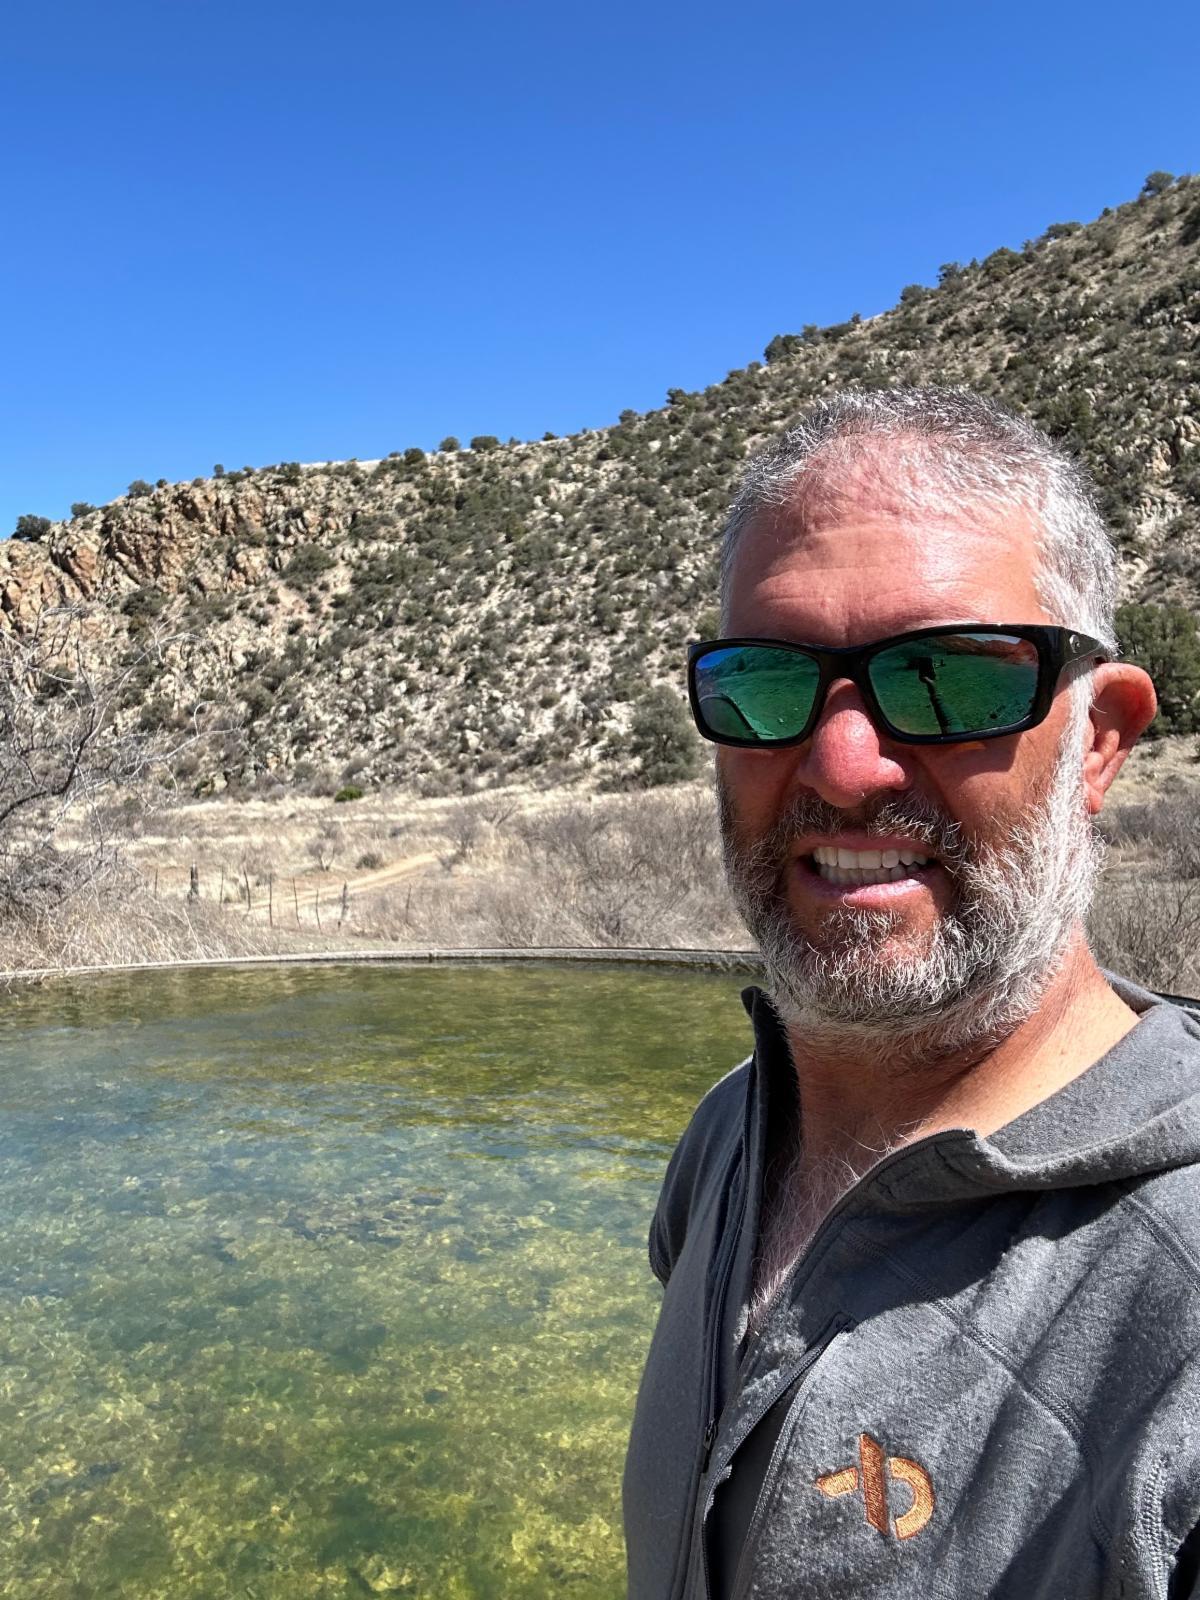 Tom in the Gila National Forest and the Gila Cliff Dwellings.